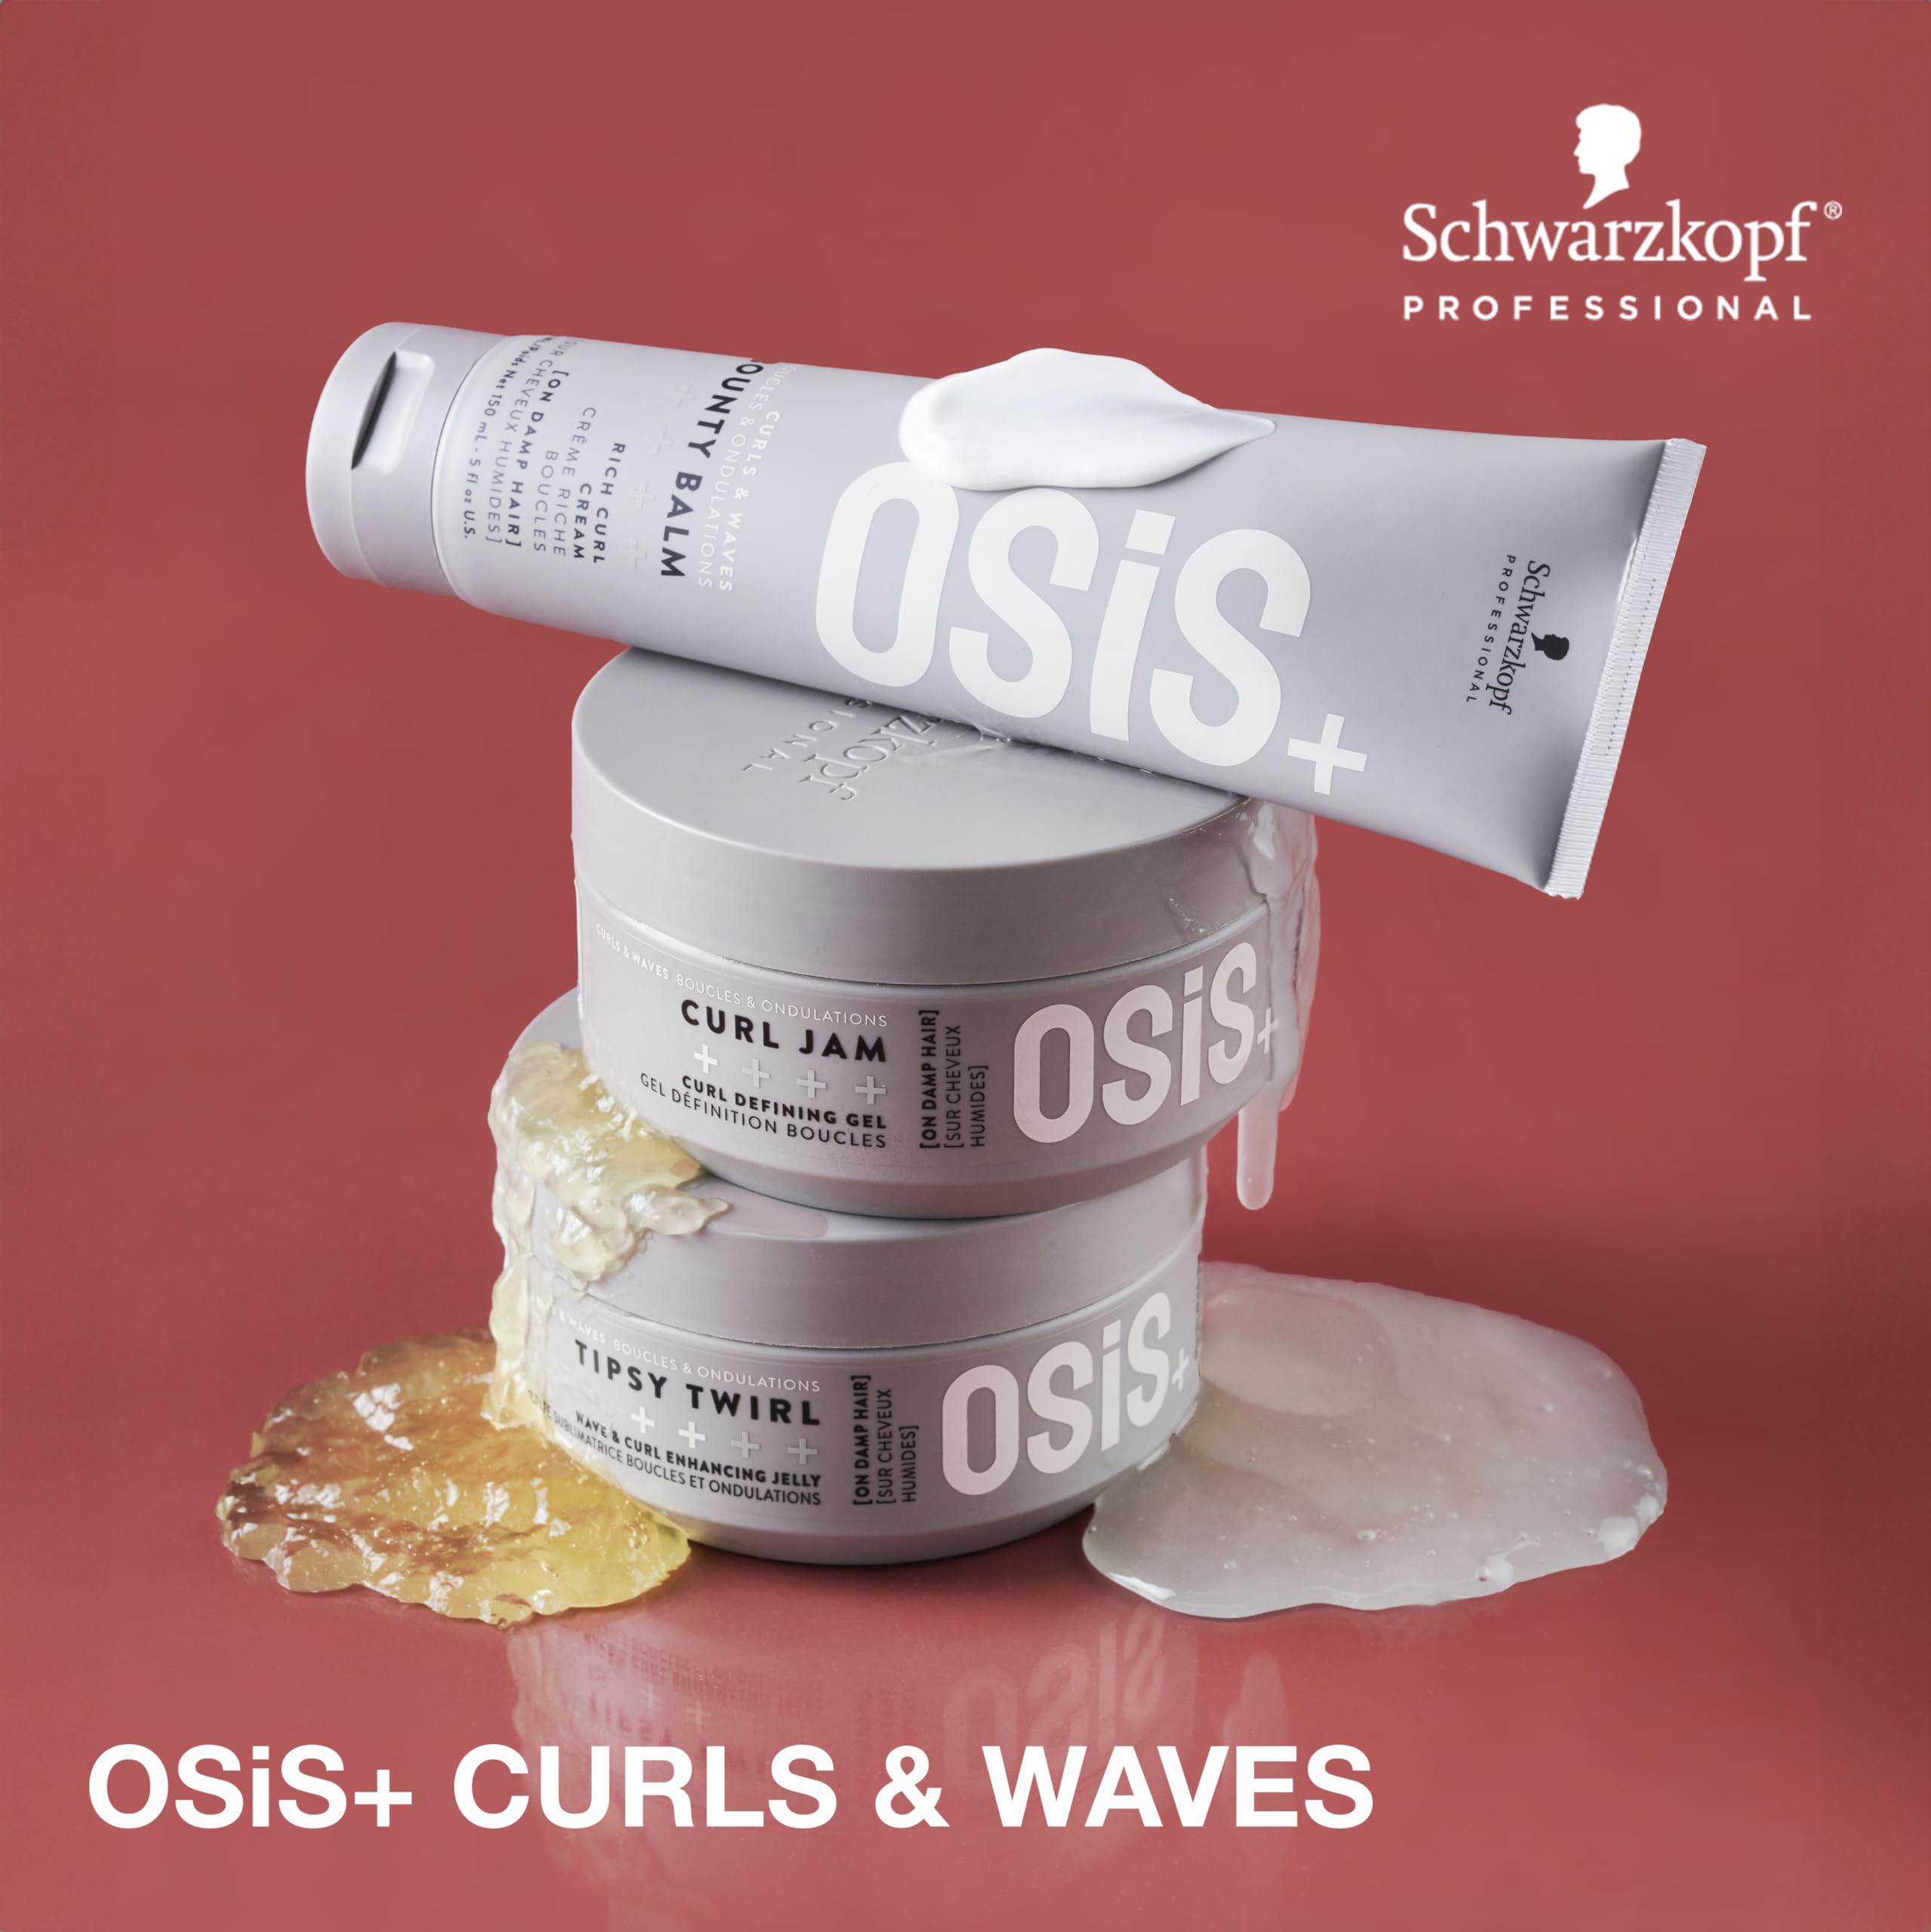 OSiS+ Tipsy Twirl Curl Definition Jelly 10.1 oz | Enhances Curl Body and Shape | Humidity Protection | Medium Hold | All Curly Types